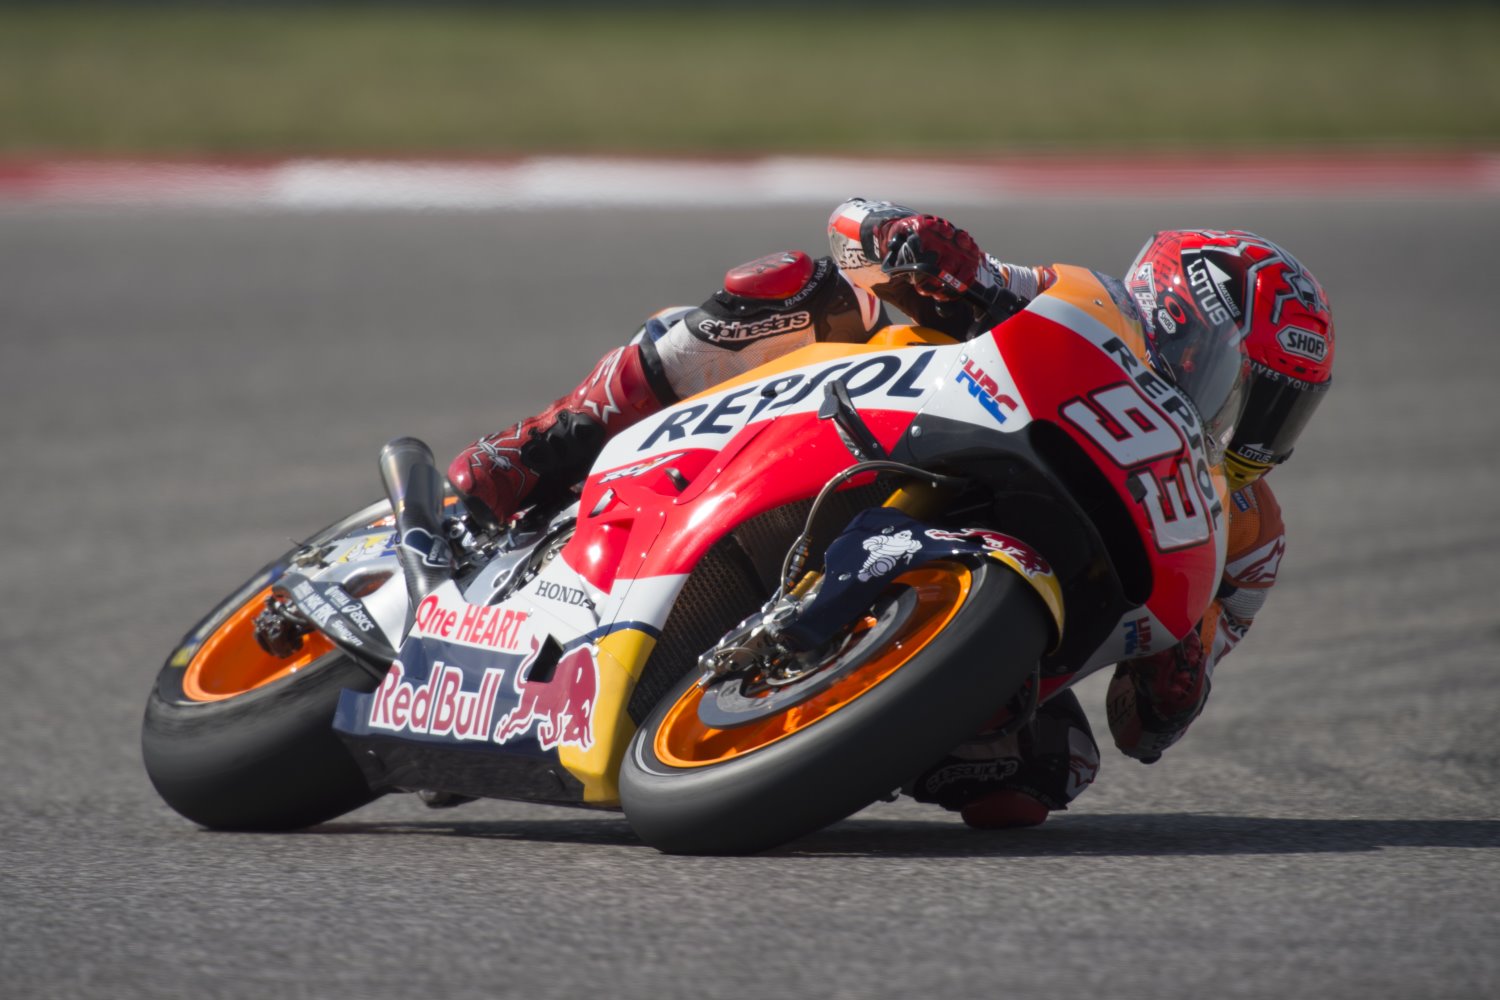 Marquez on pole for 4th straight USGP at Austin